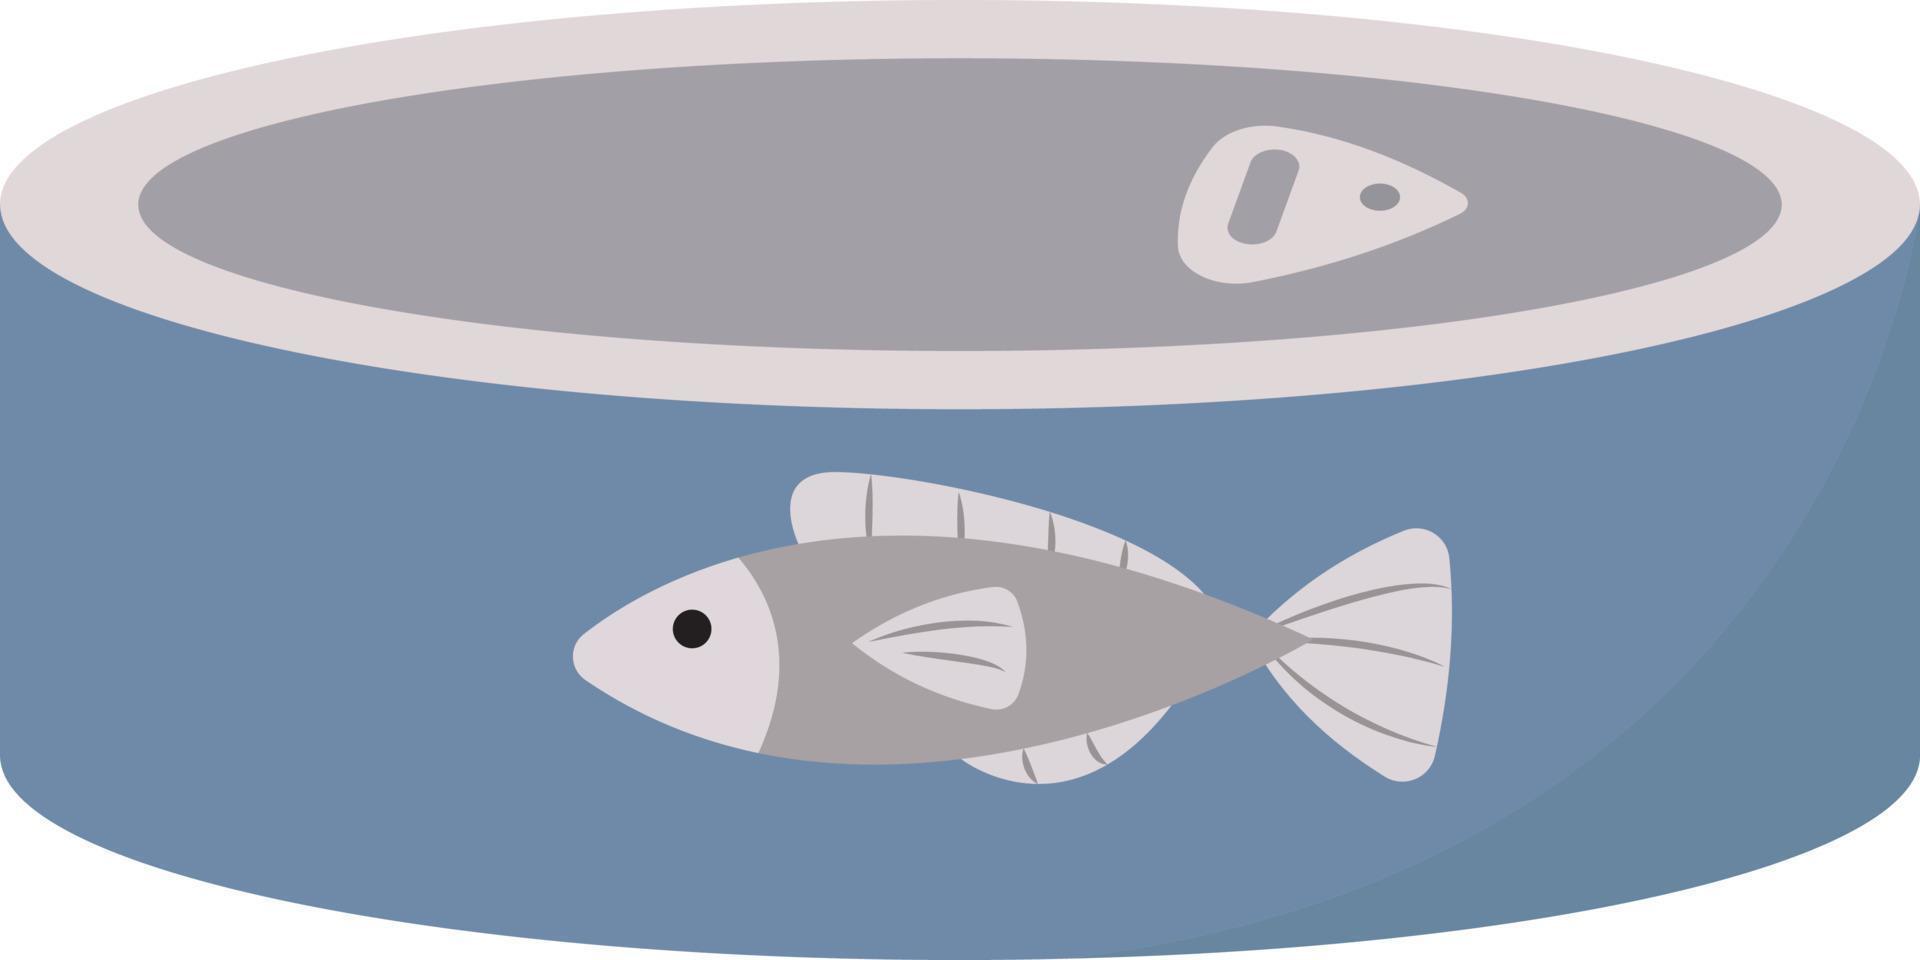 Blue fish can, illustration, vector on white background.